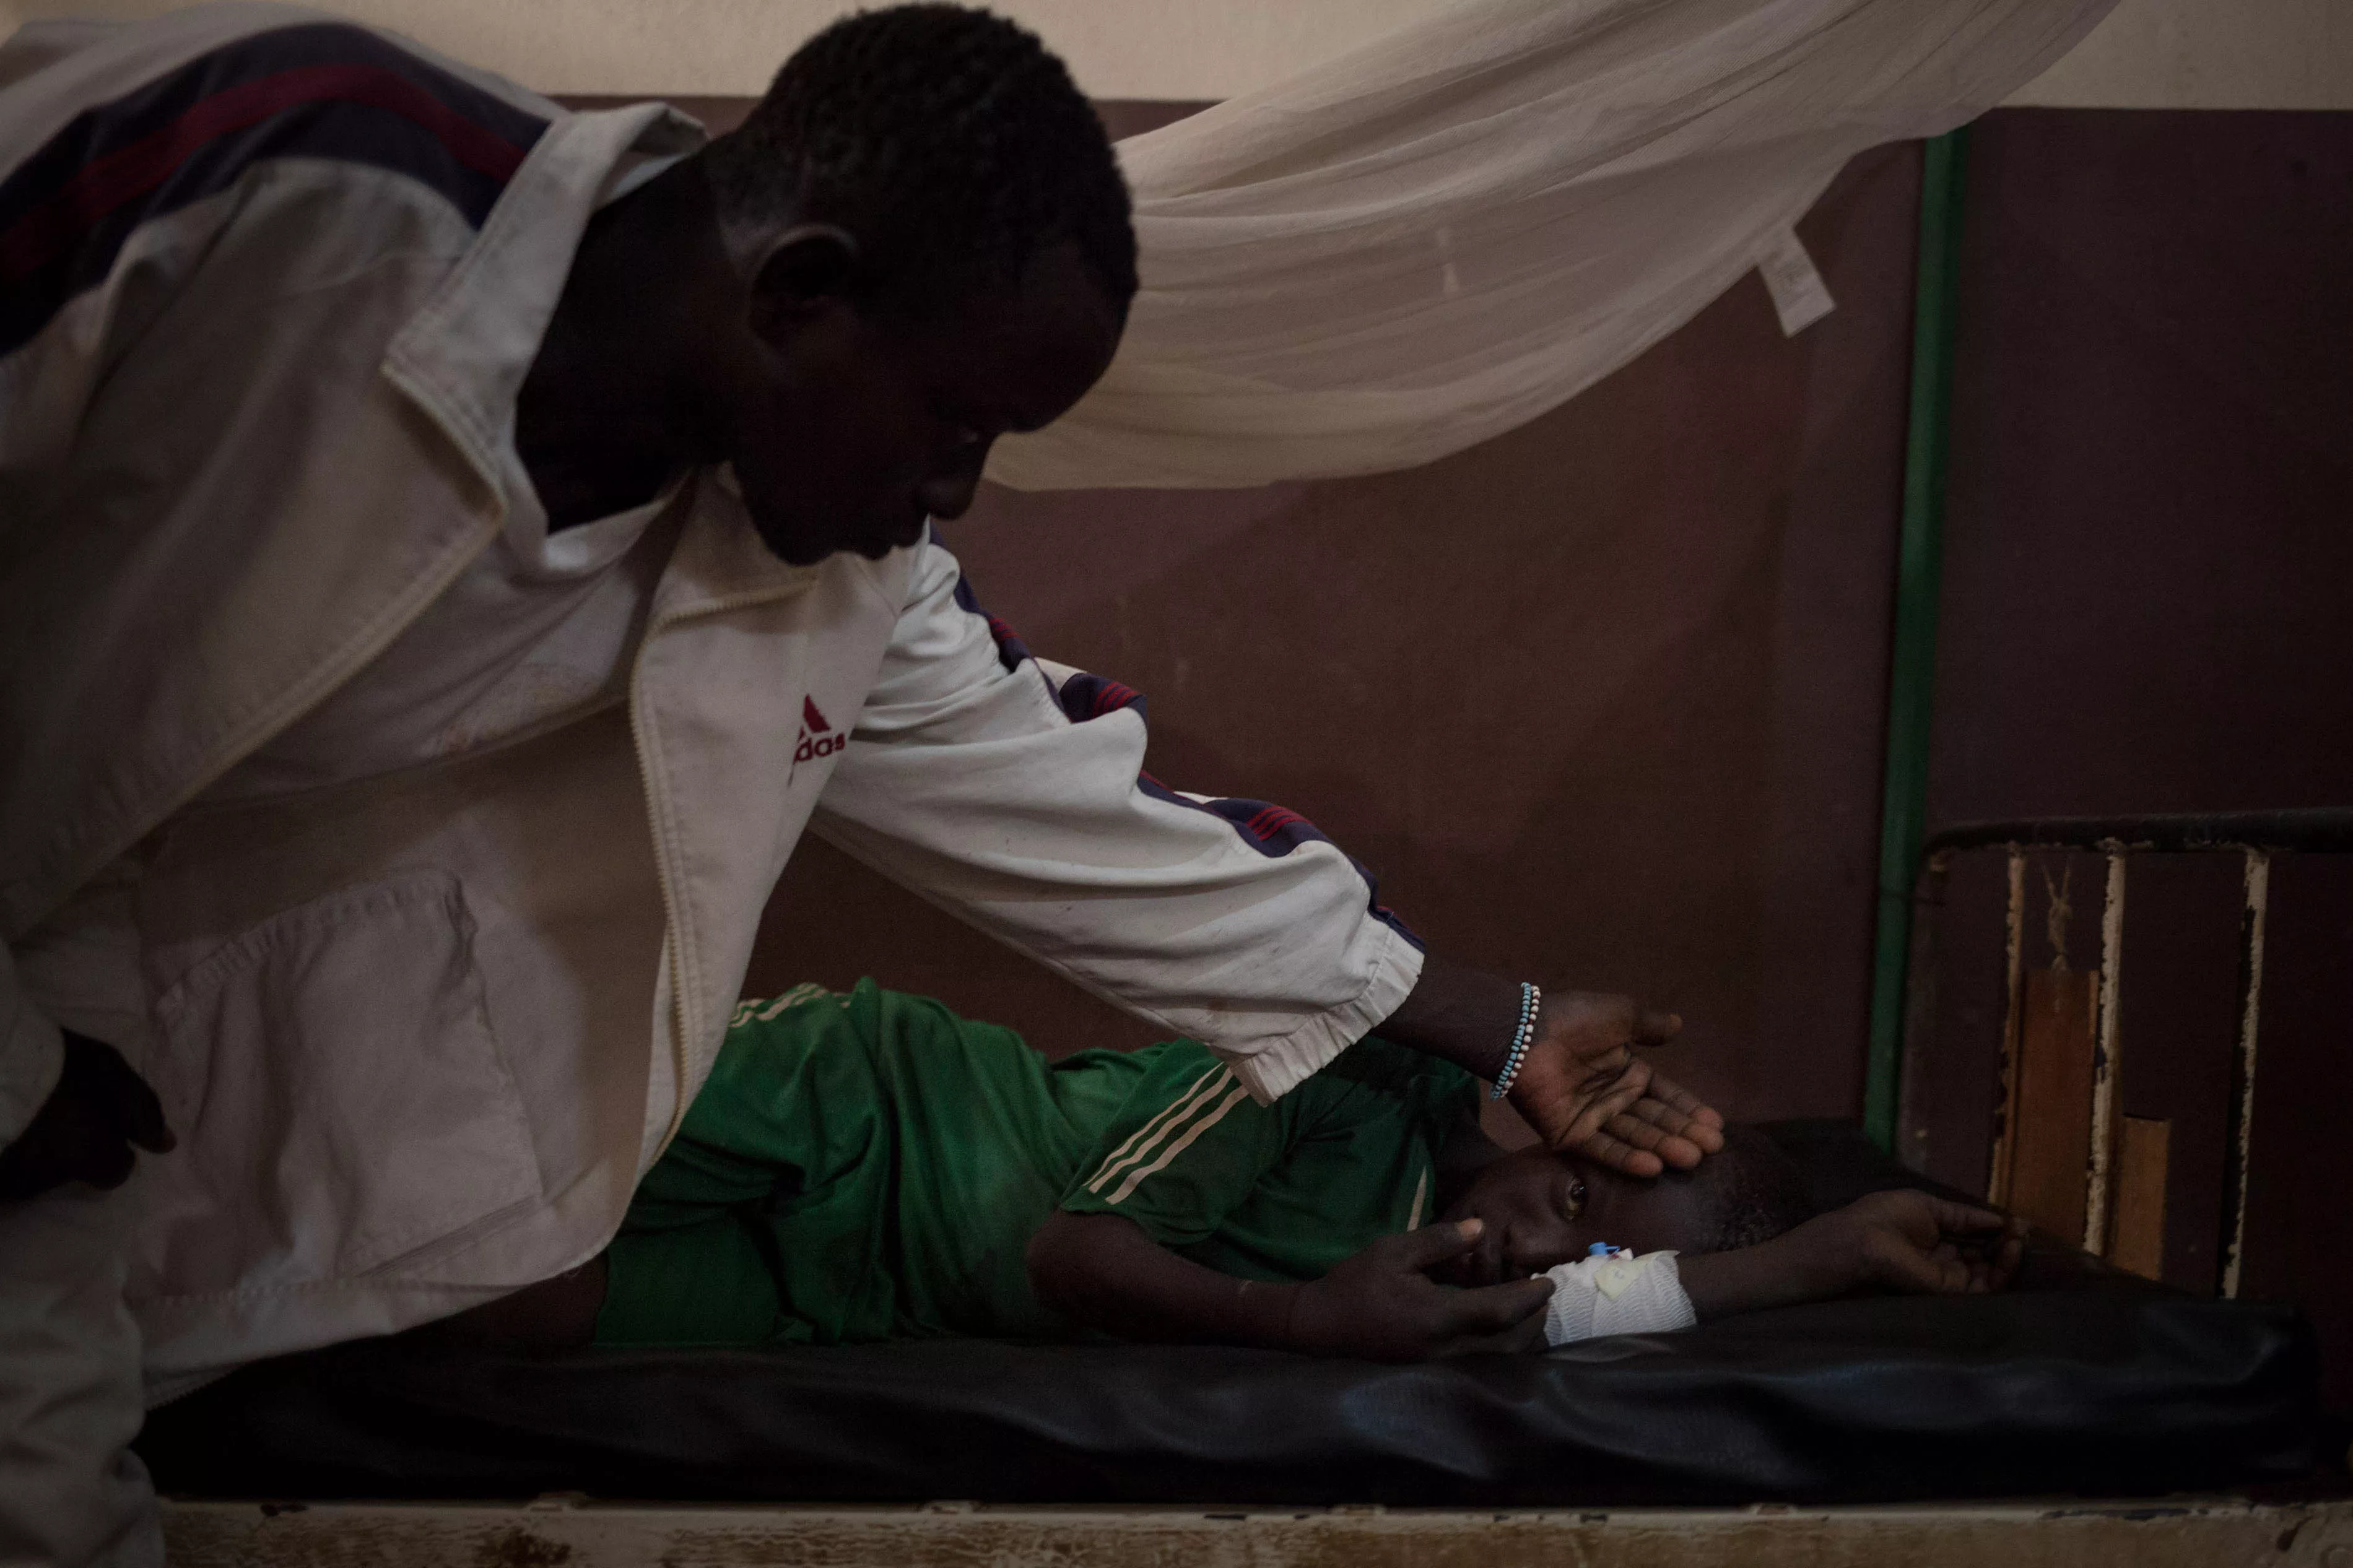 Nicsonne Dadjam, 13, is treated at Paoua Hospital, northwestern Central African Republic, supported by MSF. He was bitten by a snake while working in the fields in his village, 2 hours by motorbike from Paoua. His older brother is checking his temperature, 2018.